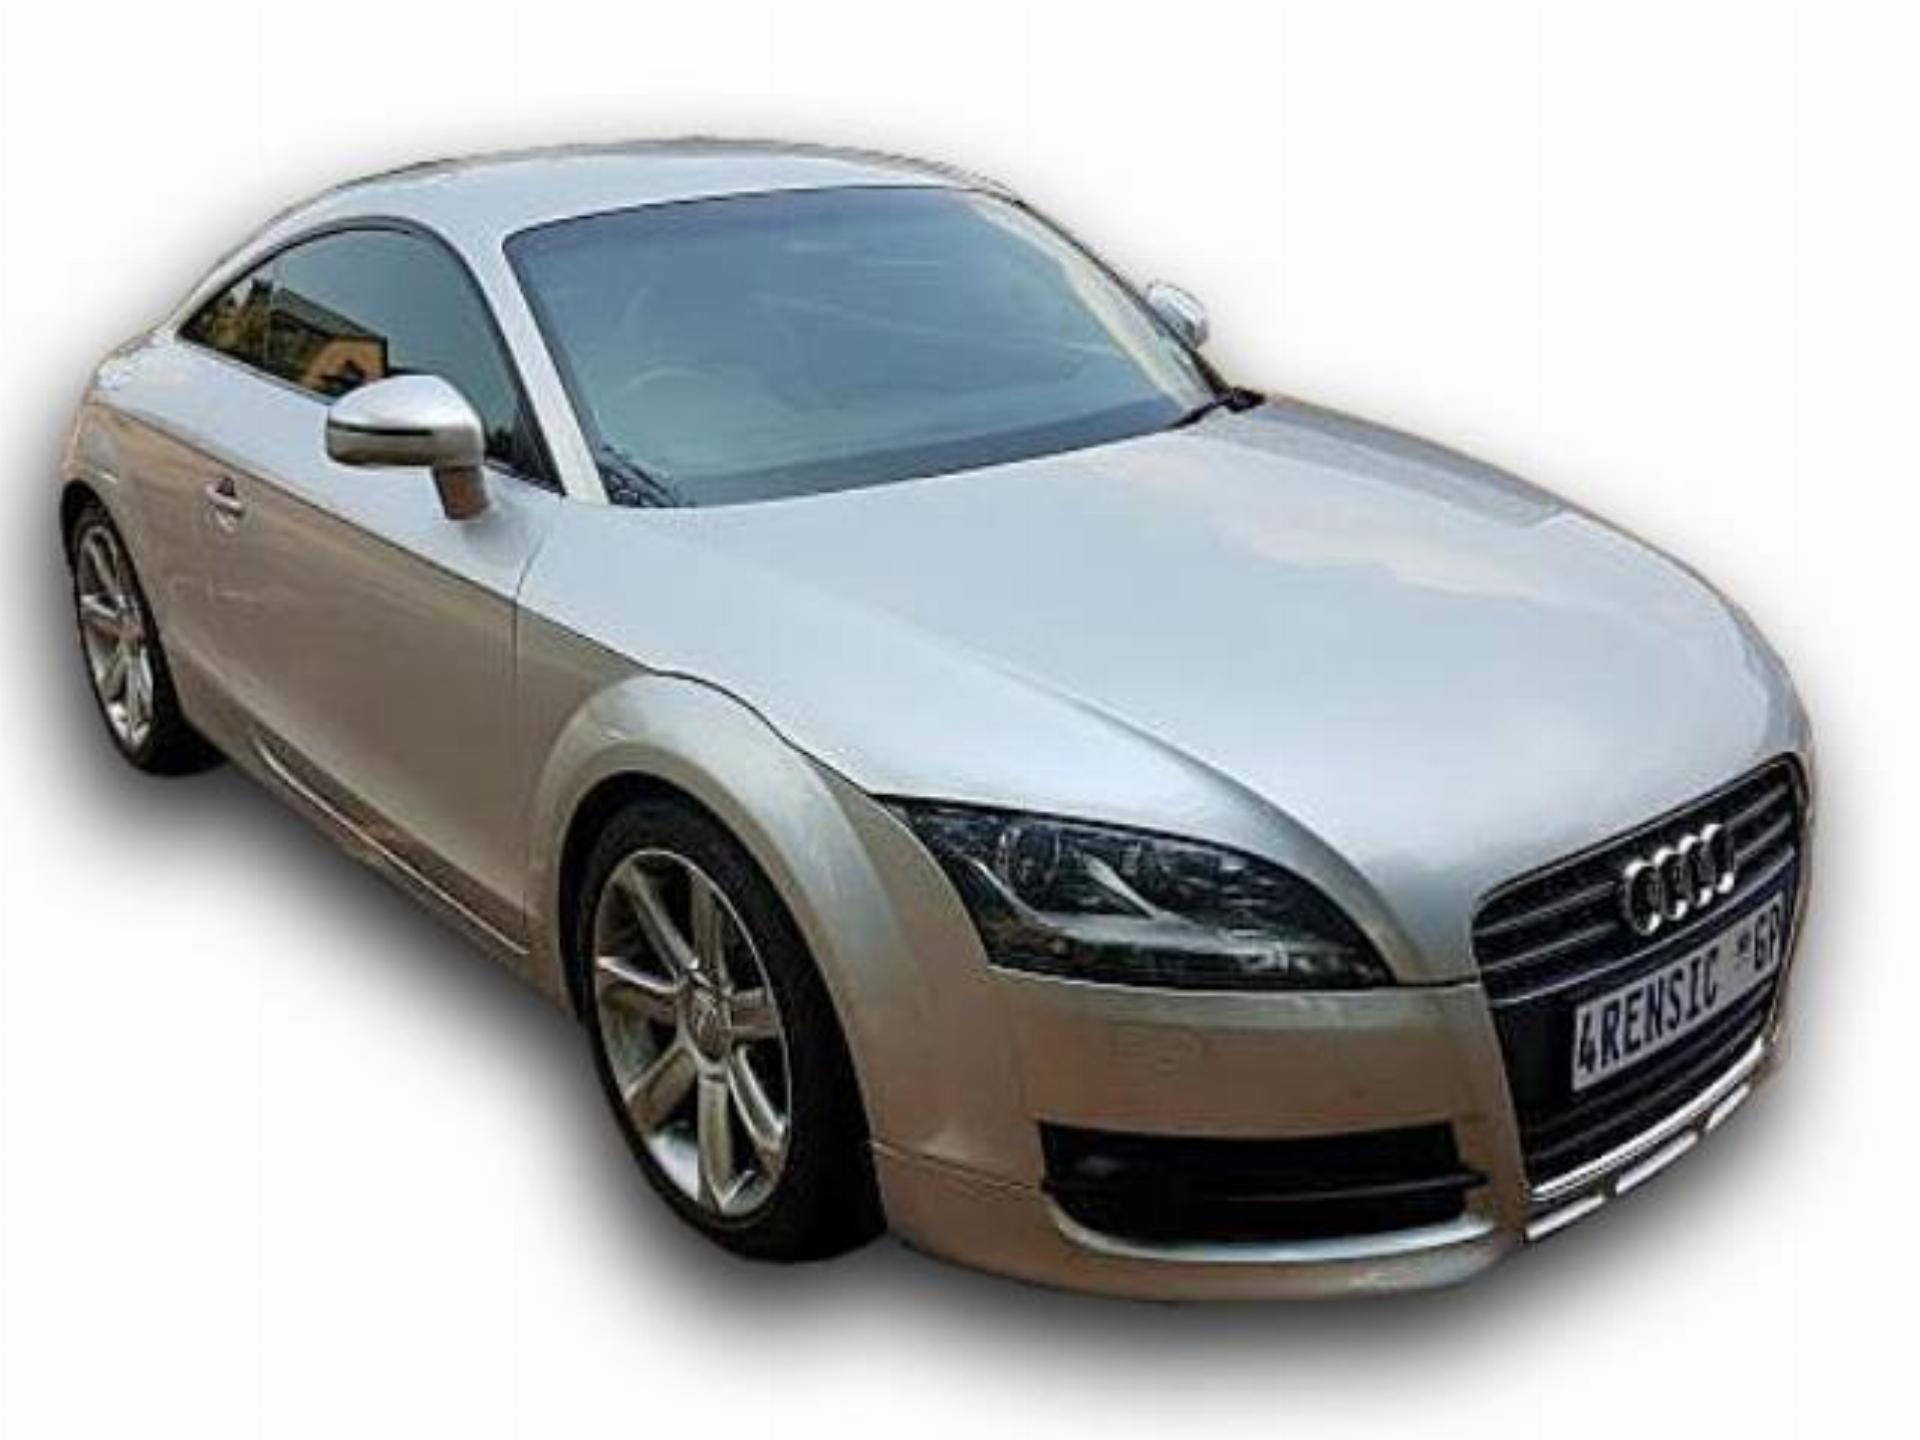 Audi TT 2.0T Stronic Immaculate